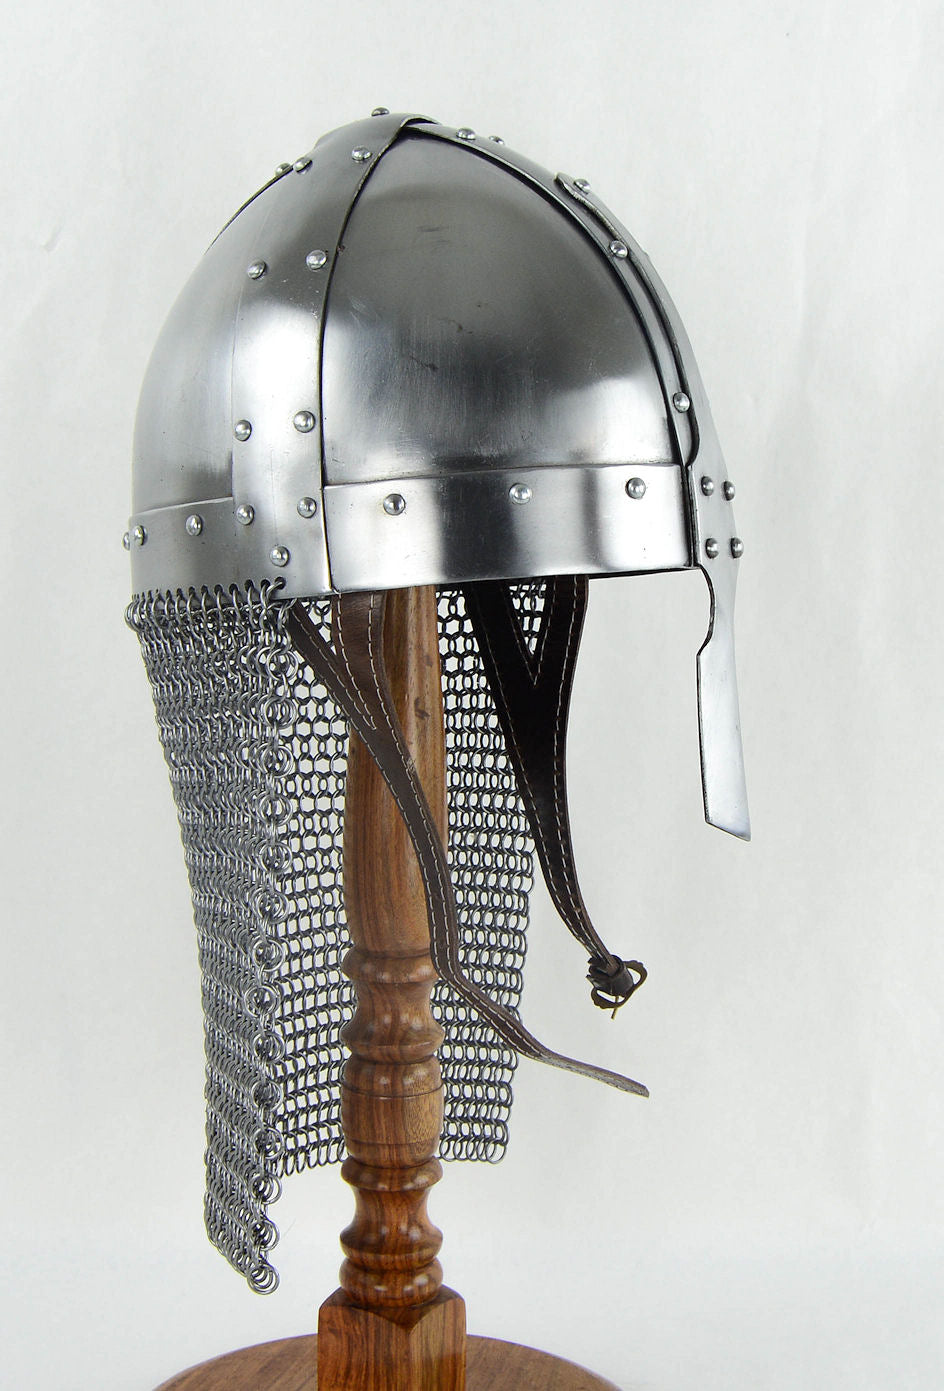 Norman Nasal Helm with Aventail - 11 / 16 Gauge